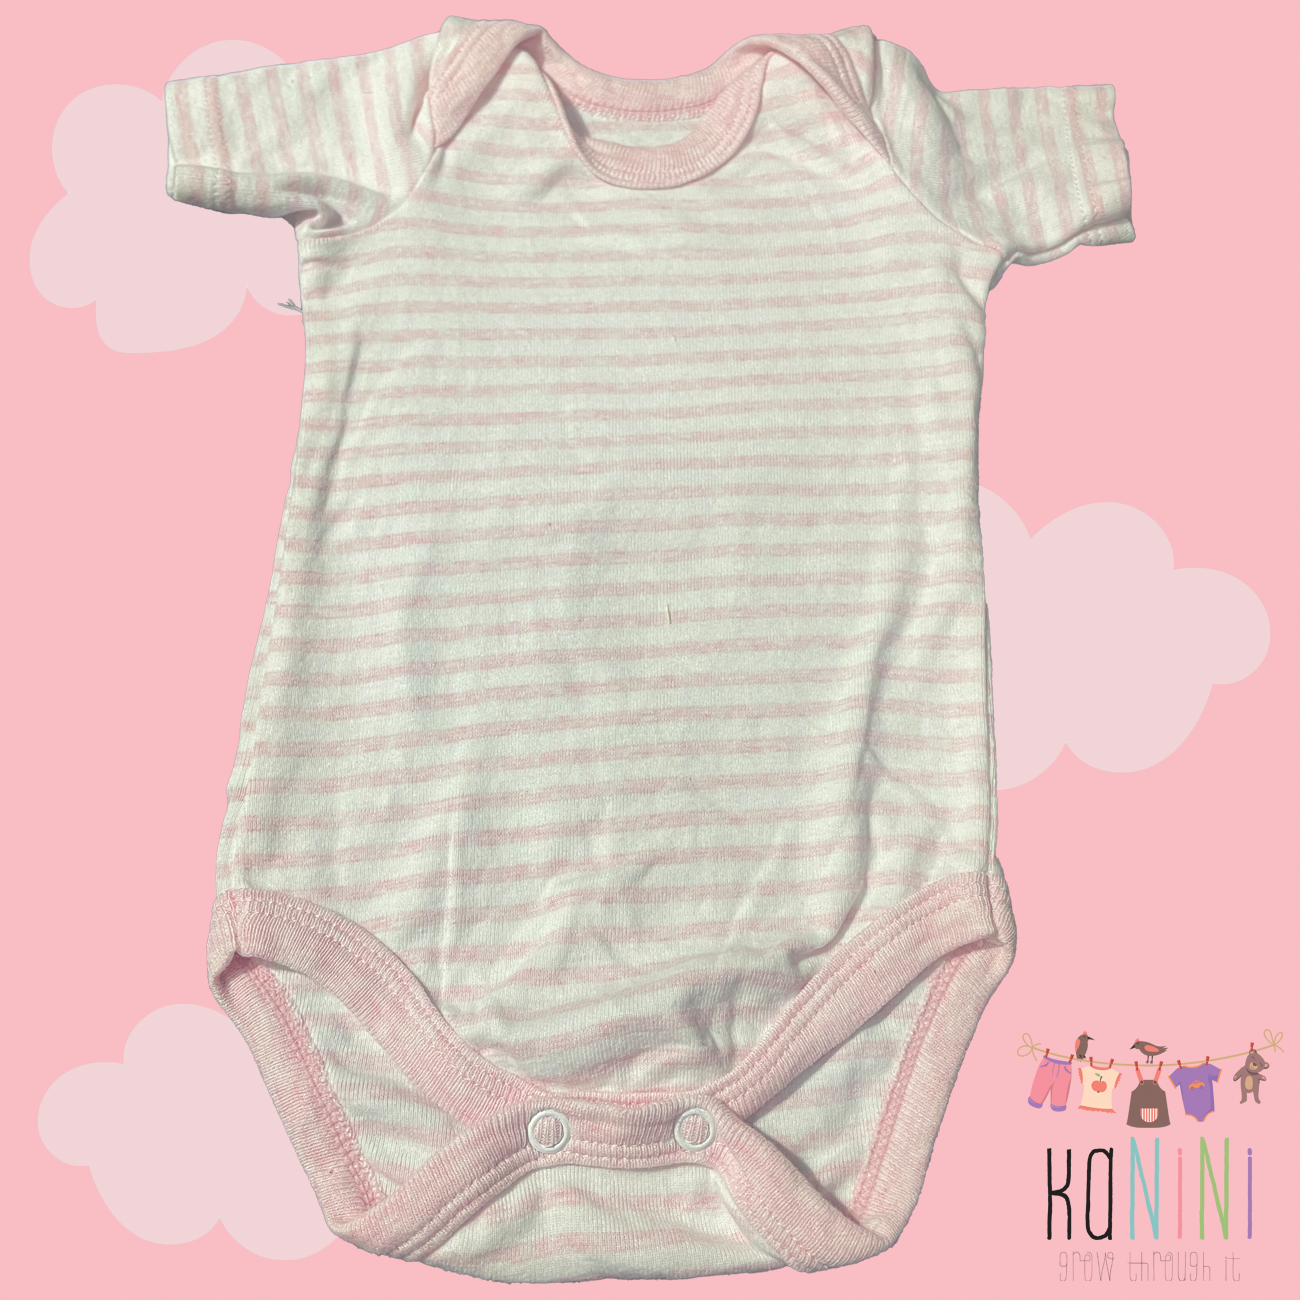 Featured image for “Woolworths 0 - 3 Months Girls Pink Striped Vest”